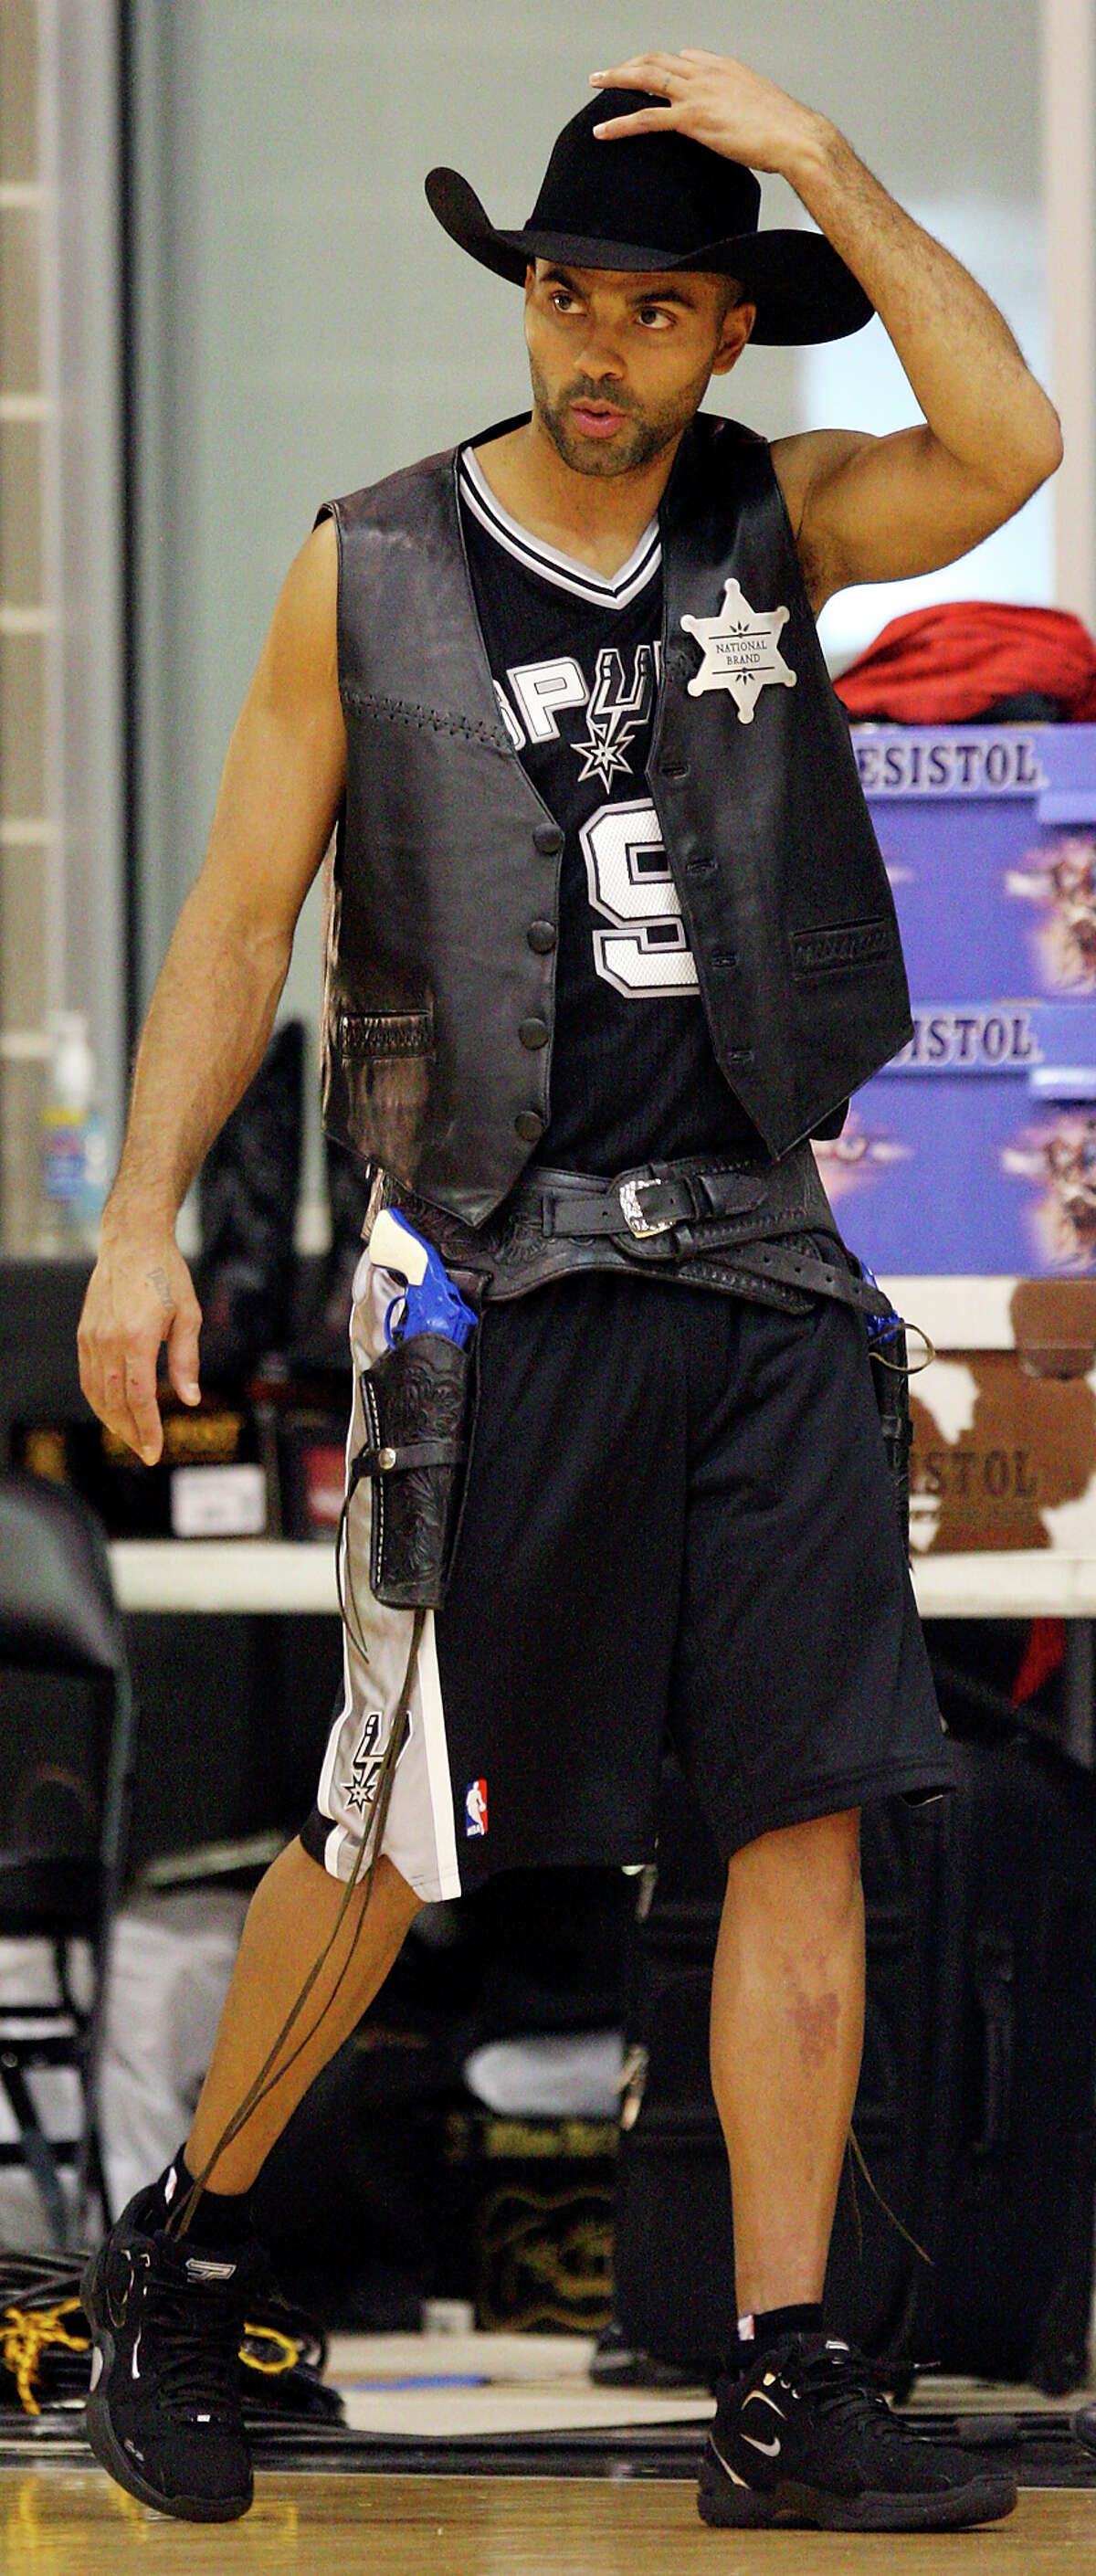 Spurs' Tony Parker adjusts his cowboy hat prior to the filming of an HEB commercial Monday Oct. 4, 2010 at the Spurs practice facility. (PHOTO BY EDWARD A. ORNELAS/eaornelas@express-news.net)